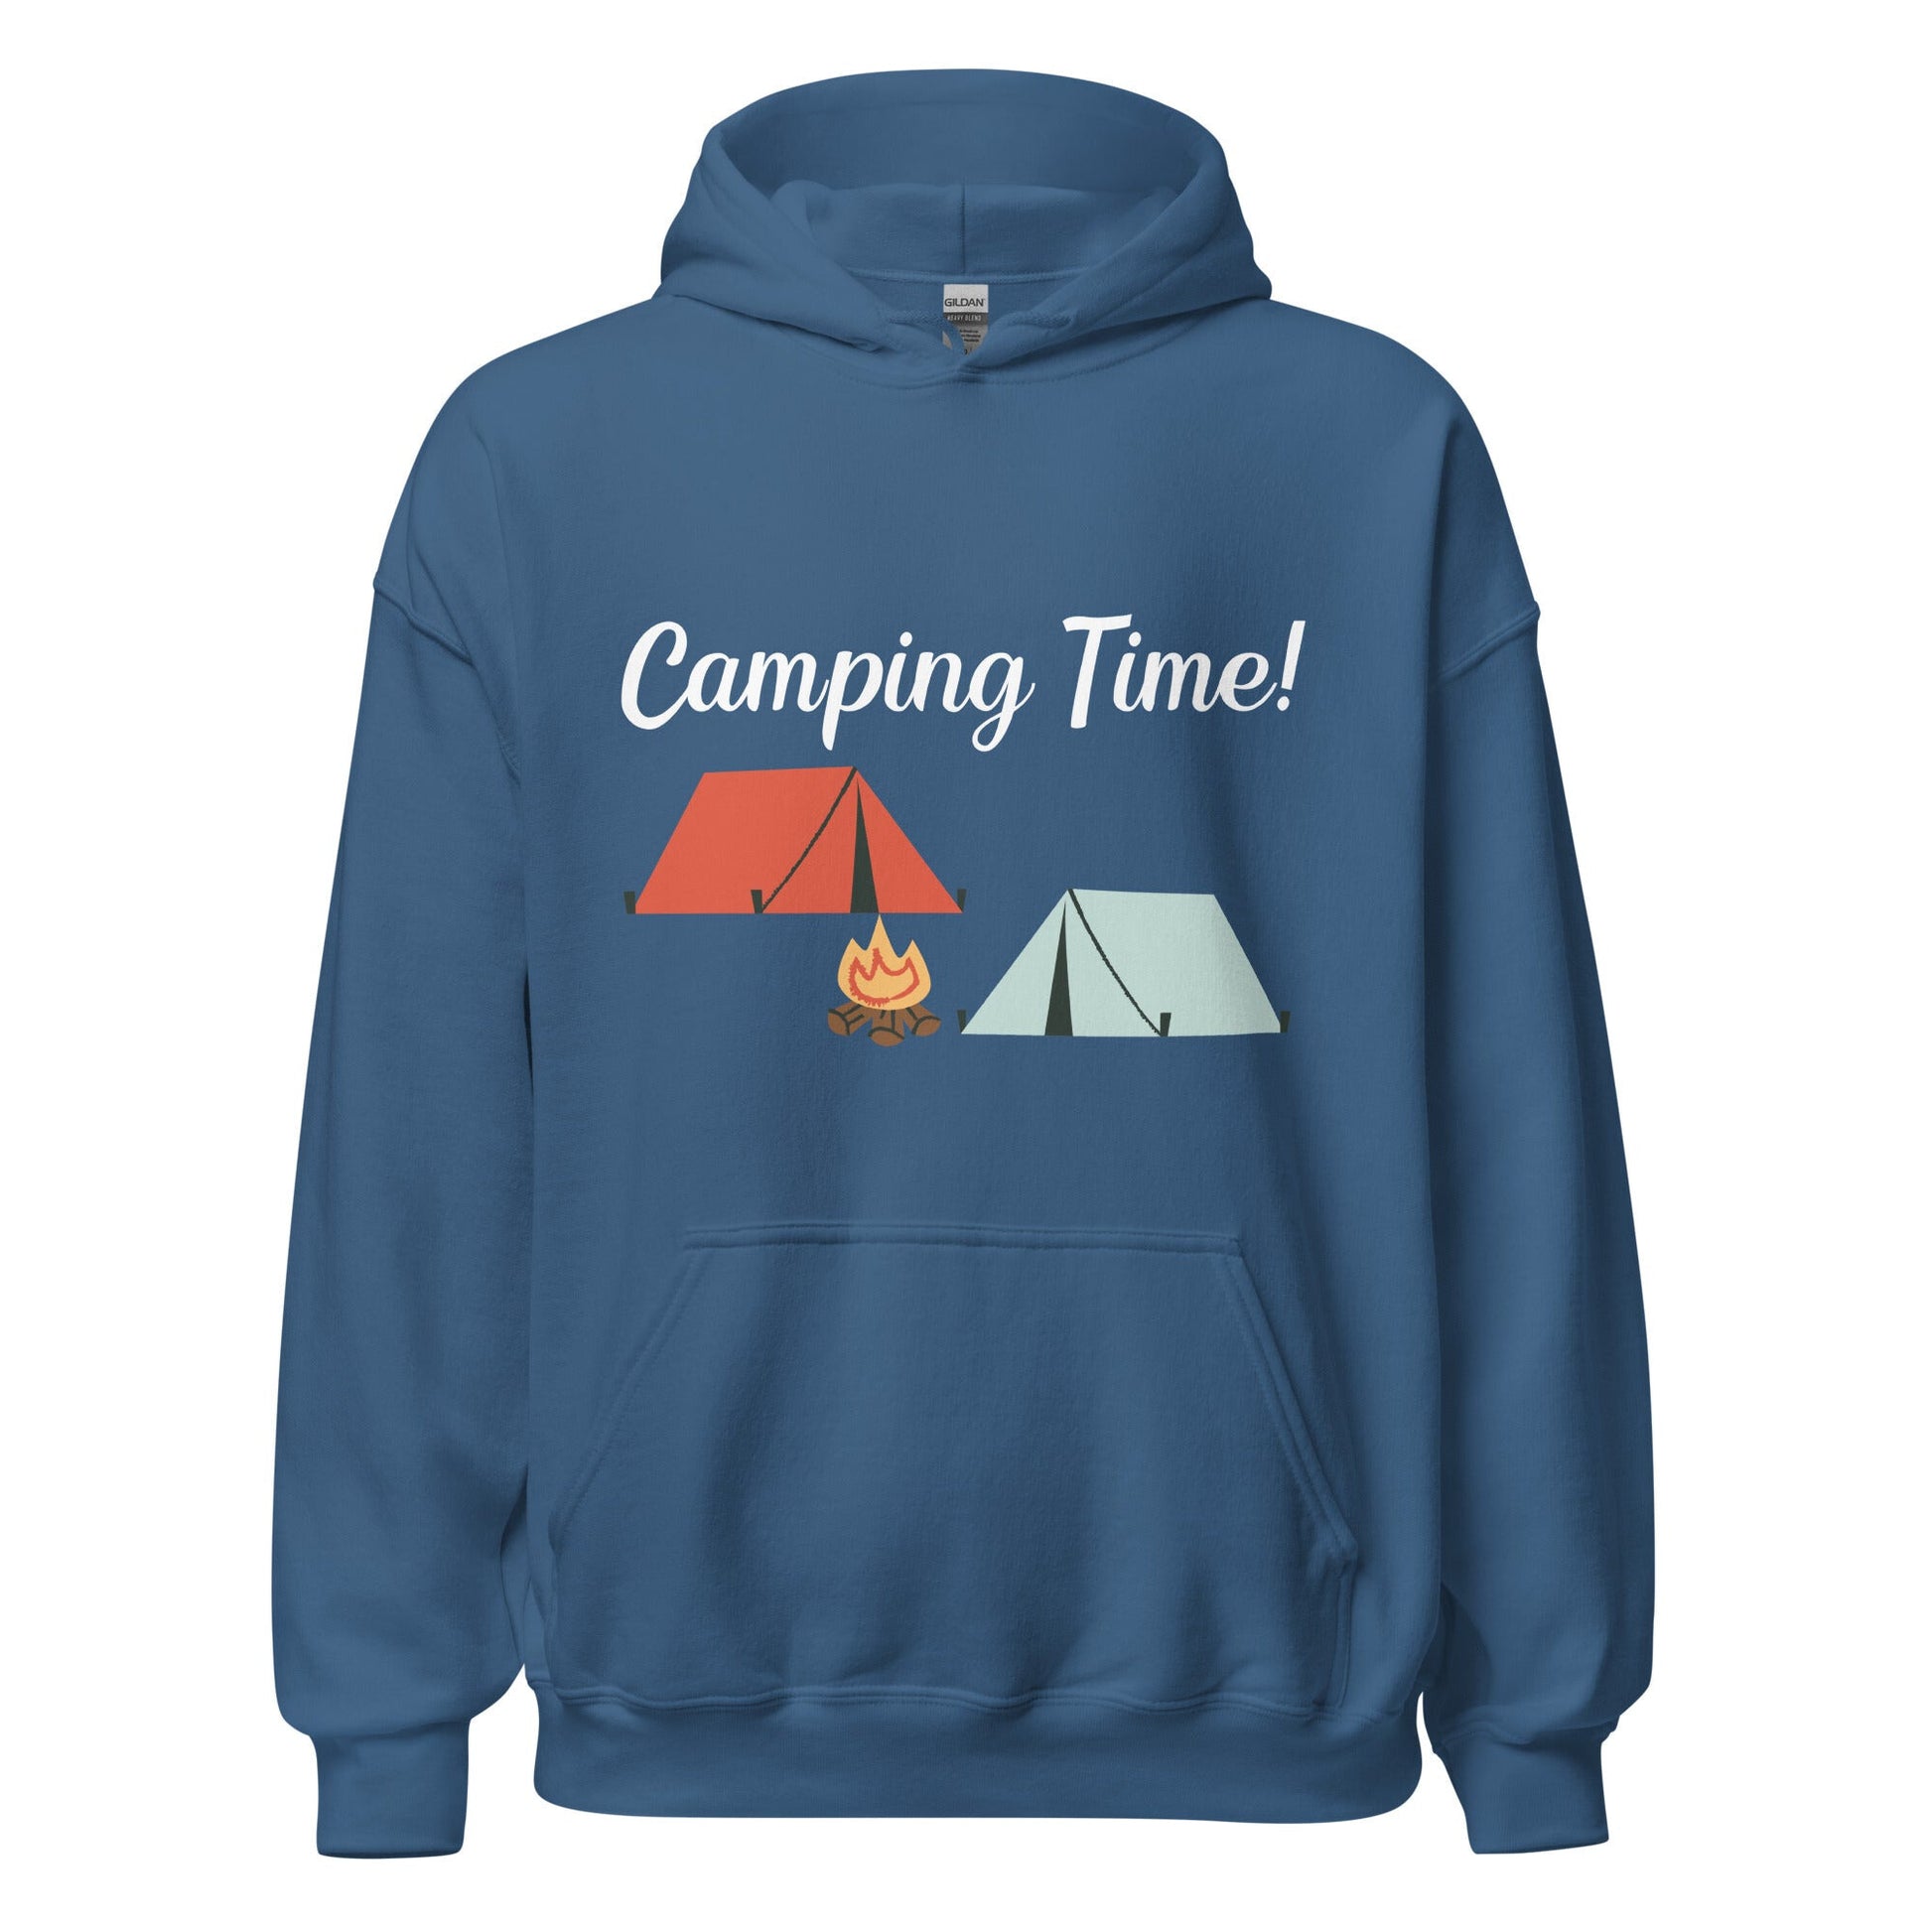 Camp in Style With This Unisex Camping Hoodie